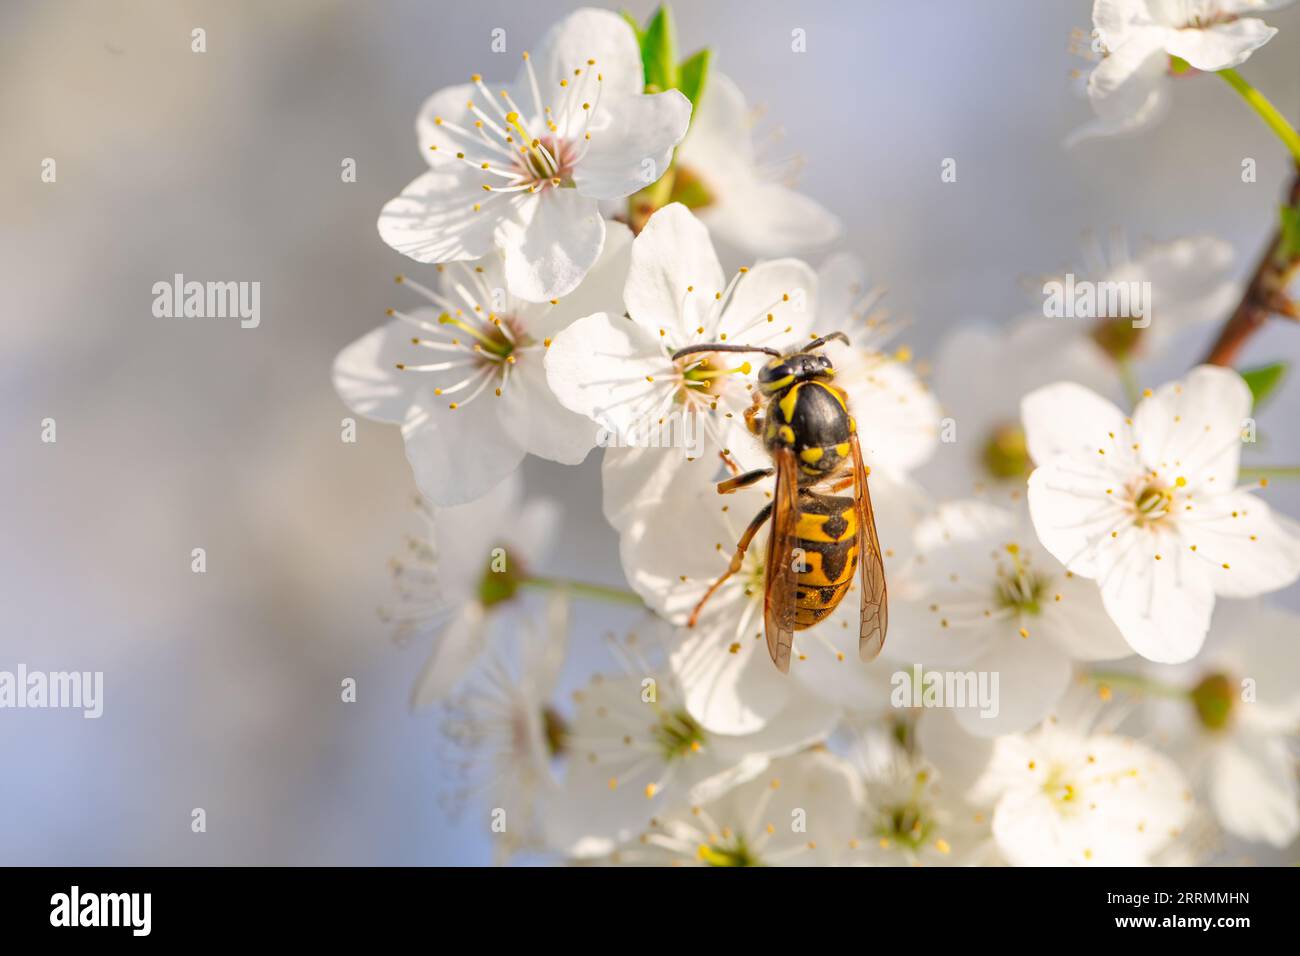 Wasp in Focus: An Intriguing Macro Shot on a White Tree Flower Stock Photo